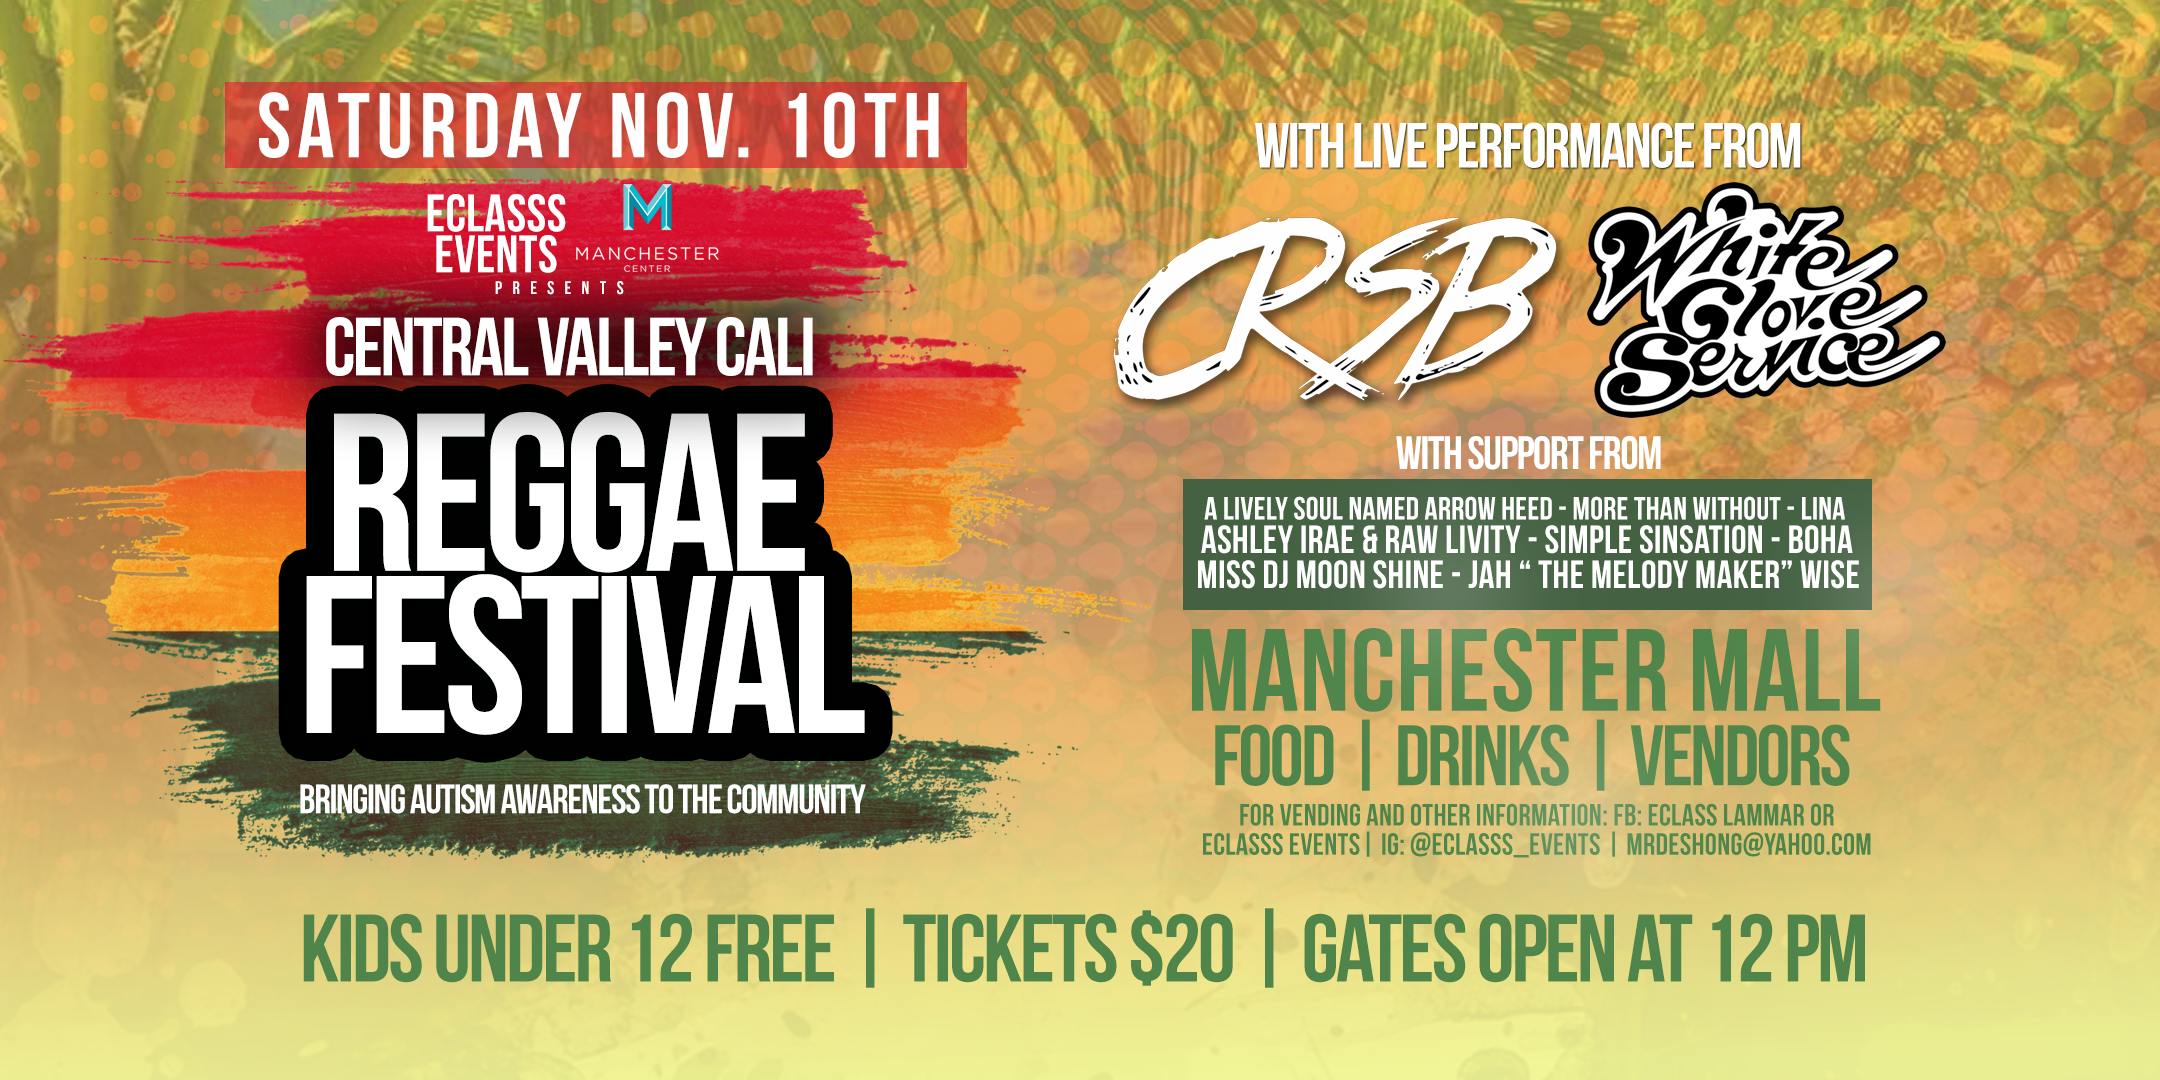 Central Valley Cali Reggae Festival bringing autism awareness to the community 